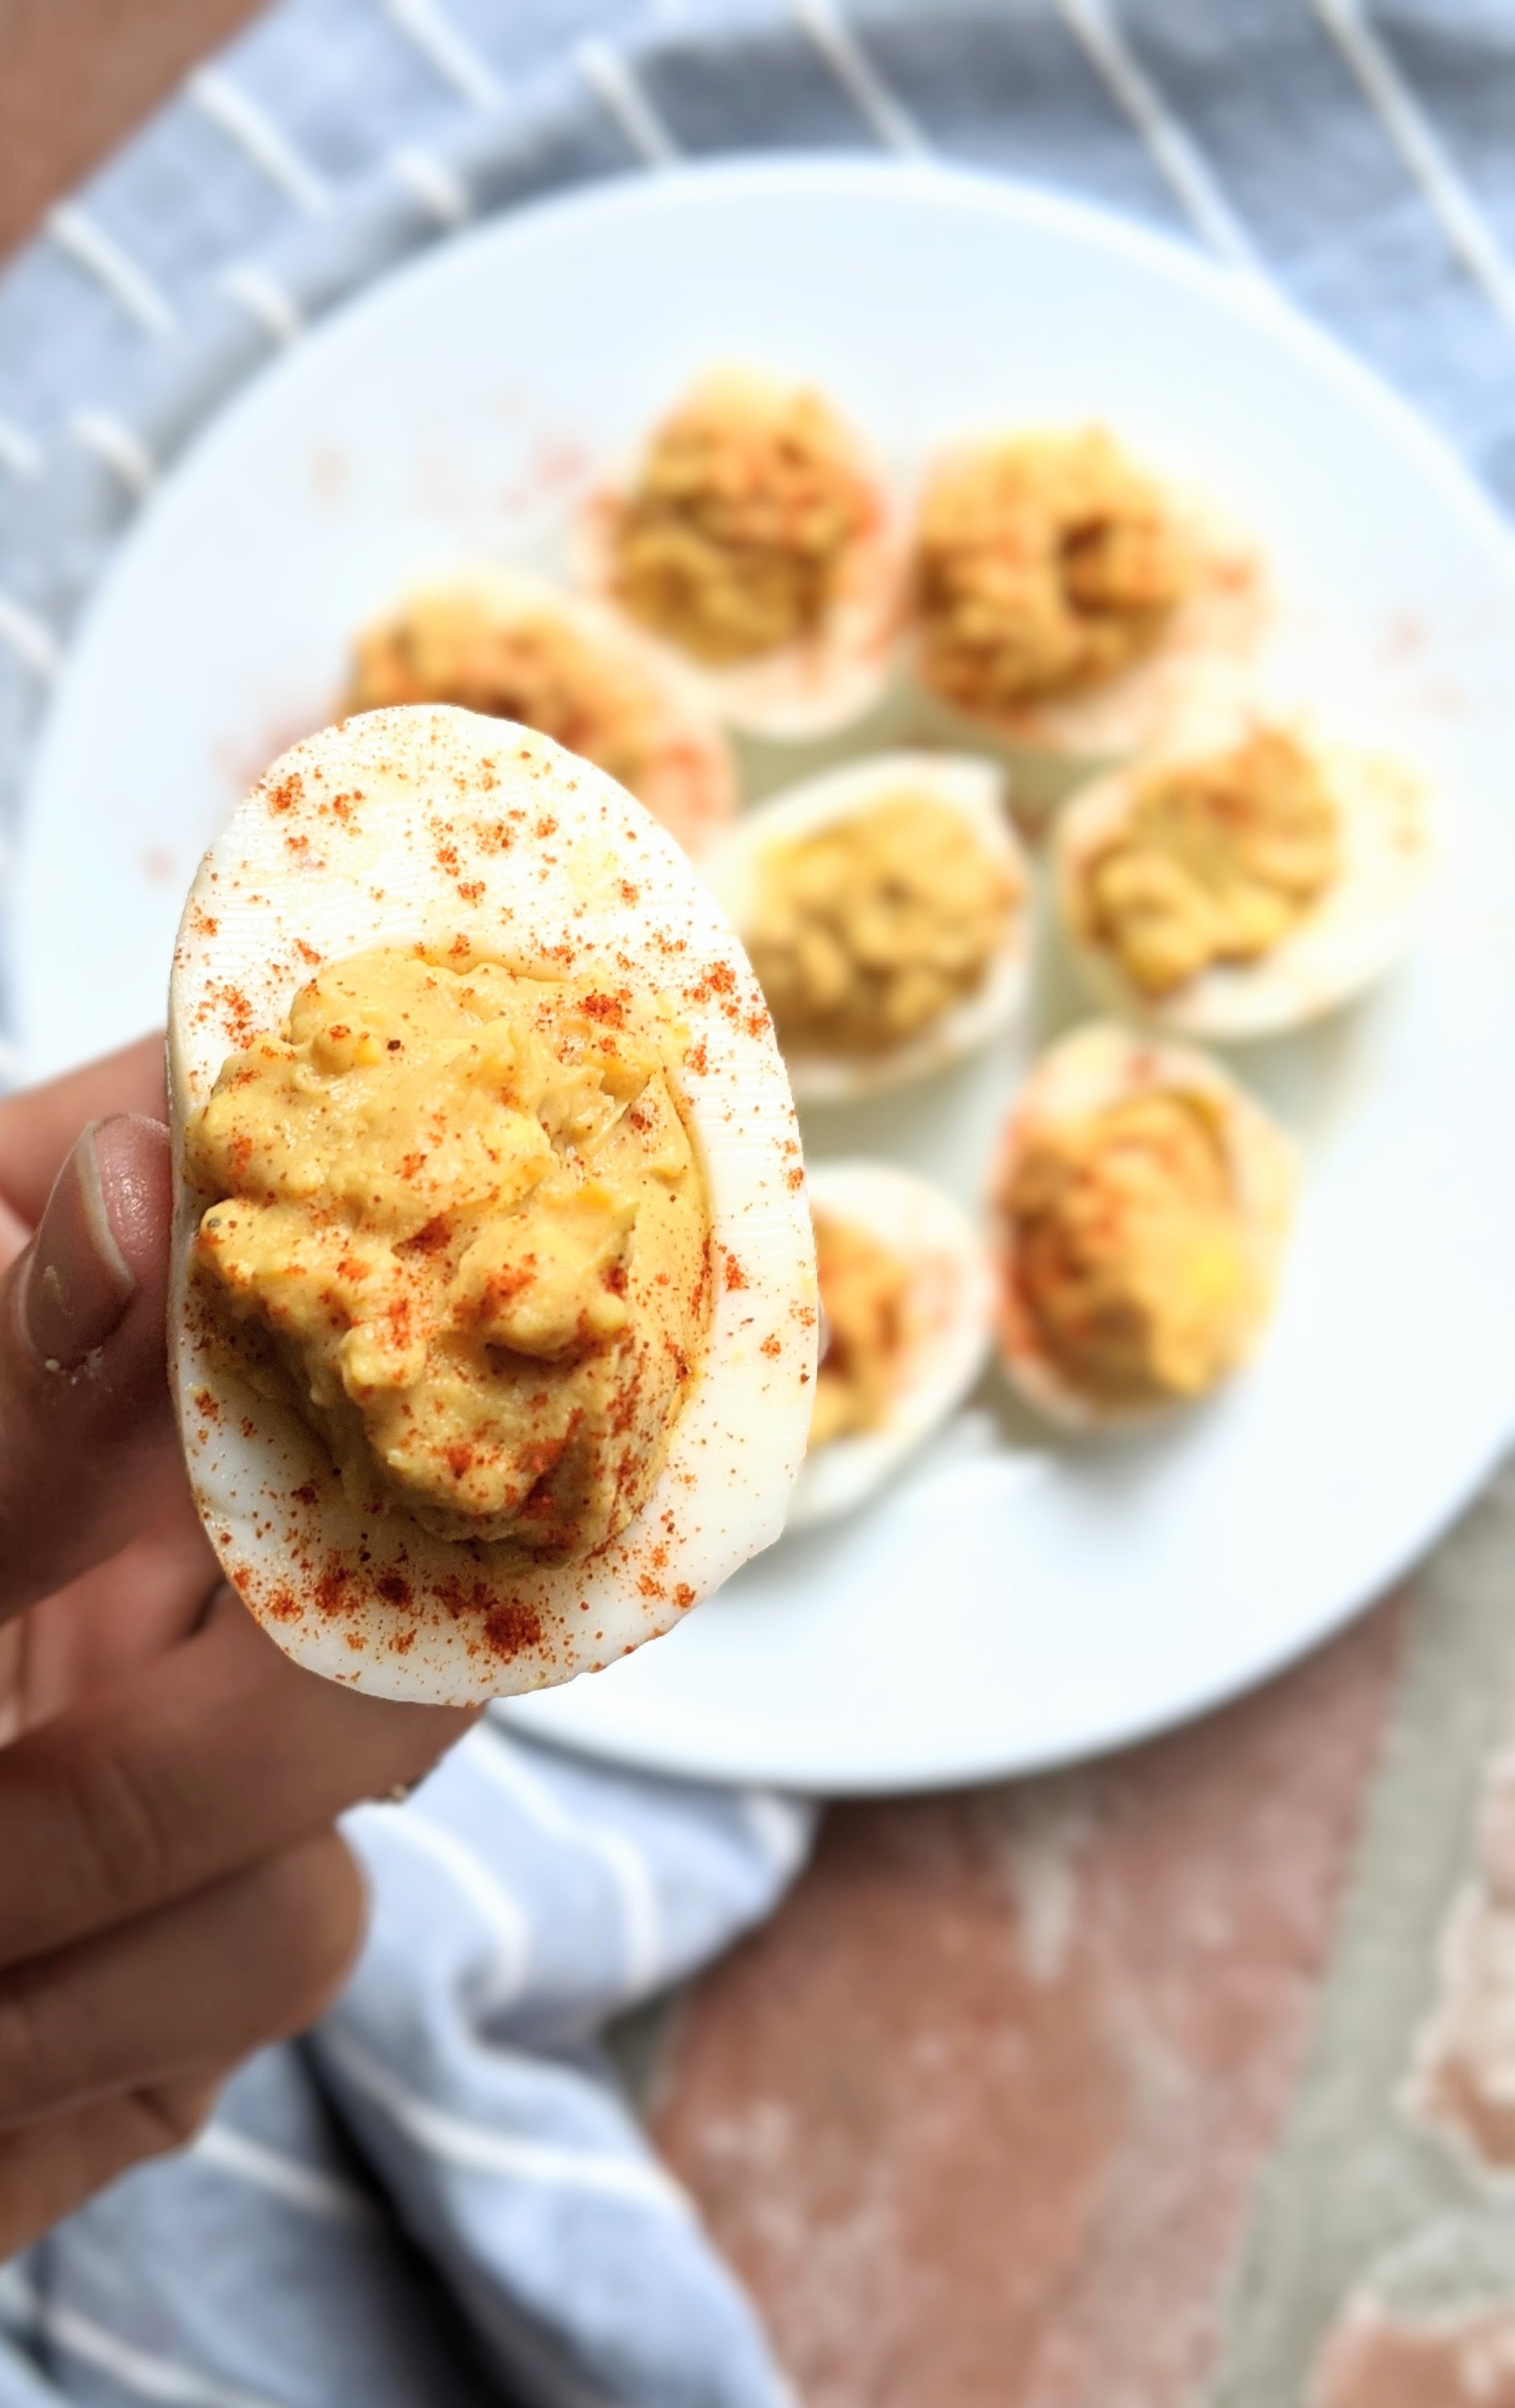 vegetarian bbq deviled eggs recipe with smoked paprika dill relish paleo bbq sauce and whole grain dijon mustard healthy vegetarian protein recipes for summer appetizers for parties bbqs